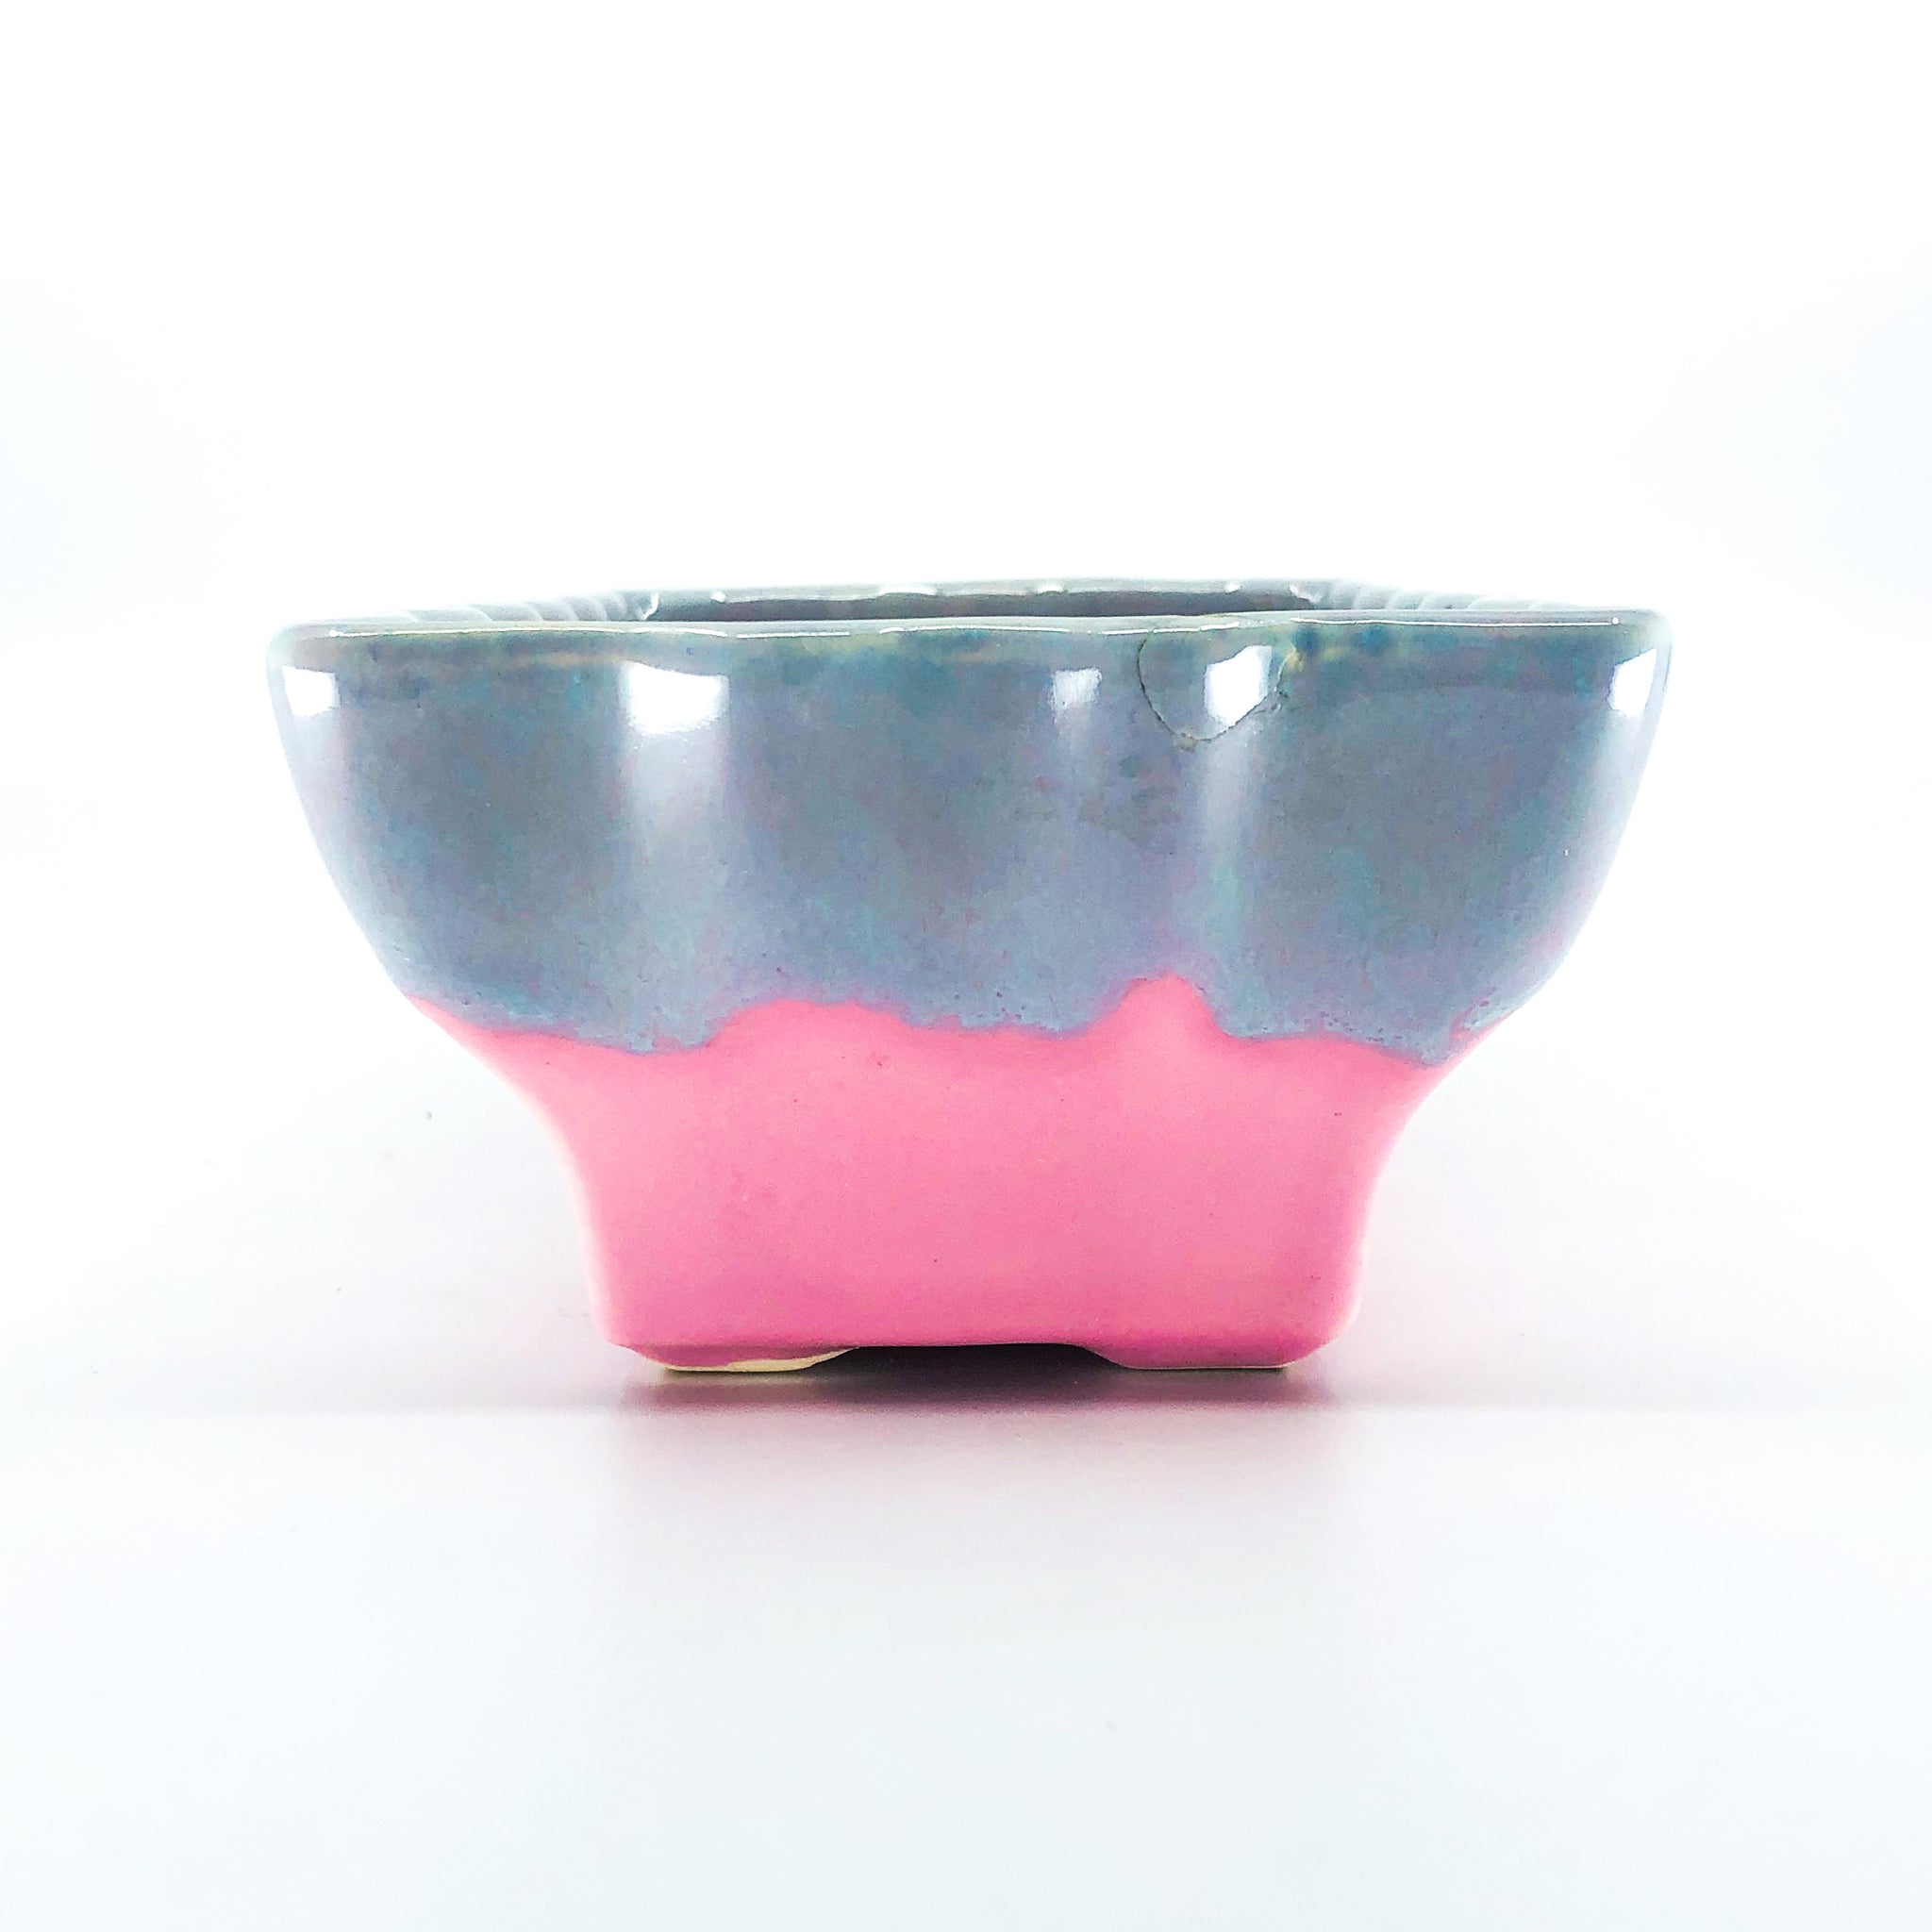 Vintage Hull USA Ceramic Candy Colored Planter / Dish